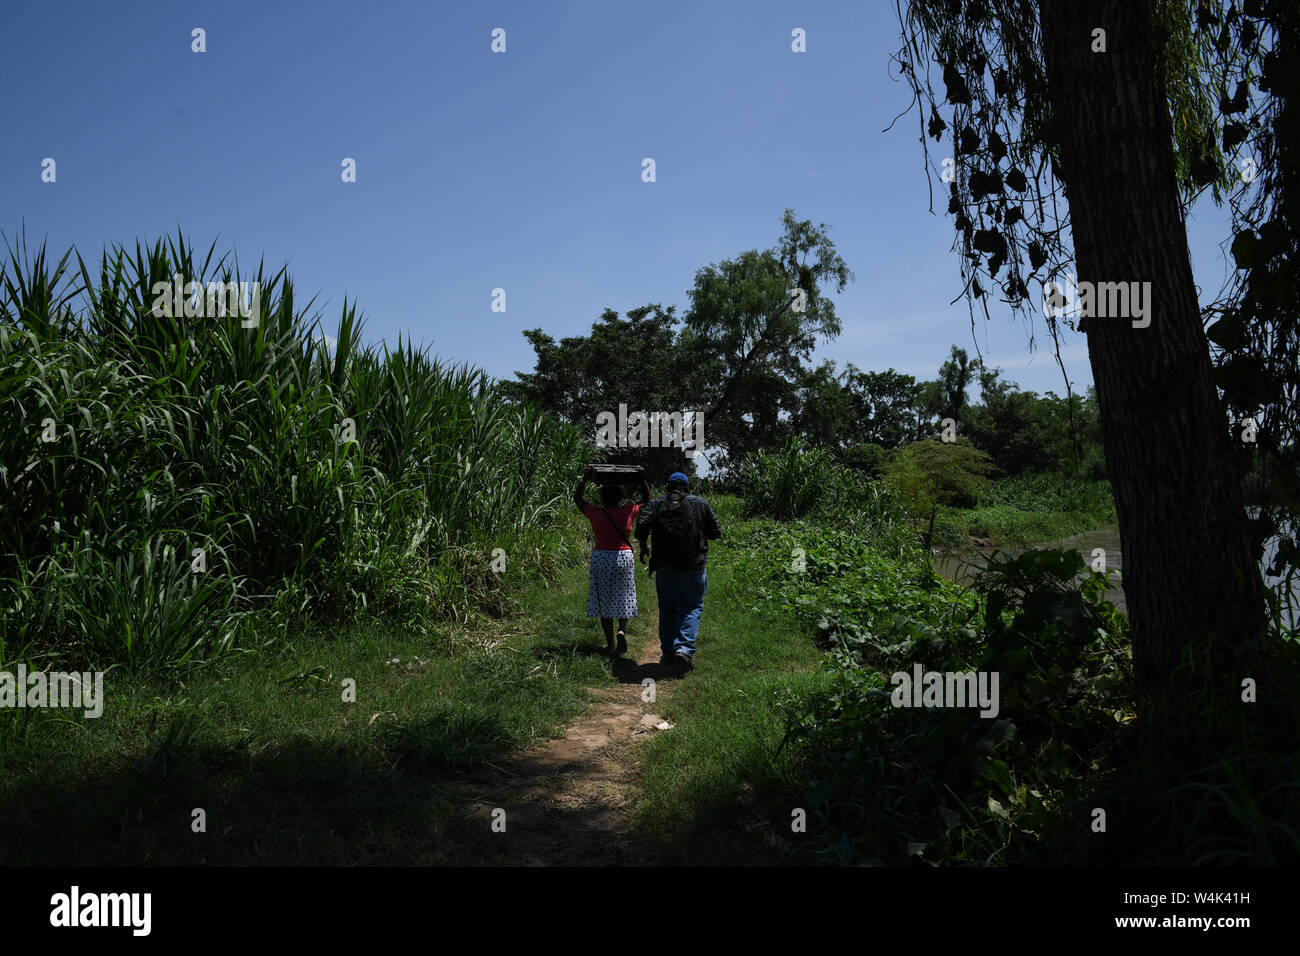 Tapachula, Chiapas, Mexico. 23rd July, 2019. A Honduran couple crosses from Los Limones, Guatemala to Libertad, Mexico on Tuesday. As the US has pressured Mexican authorities to crack down on migrants crossing the country to reach the U.S., such crossings have moved to sleepy areas like Libertad, where there is little or no official Mexican border security. Credit: Miguel Juarez Lugo/ZUMA Wire/Alamy Live News Stock Photo